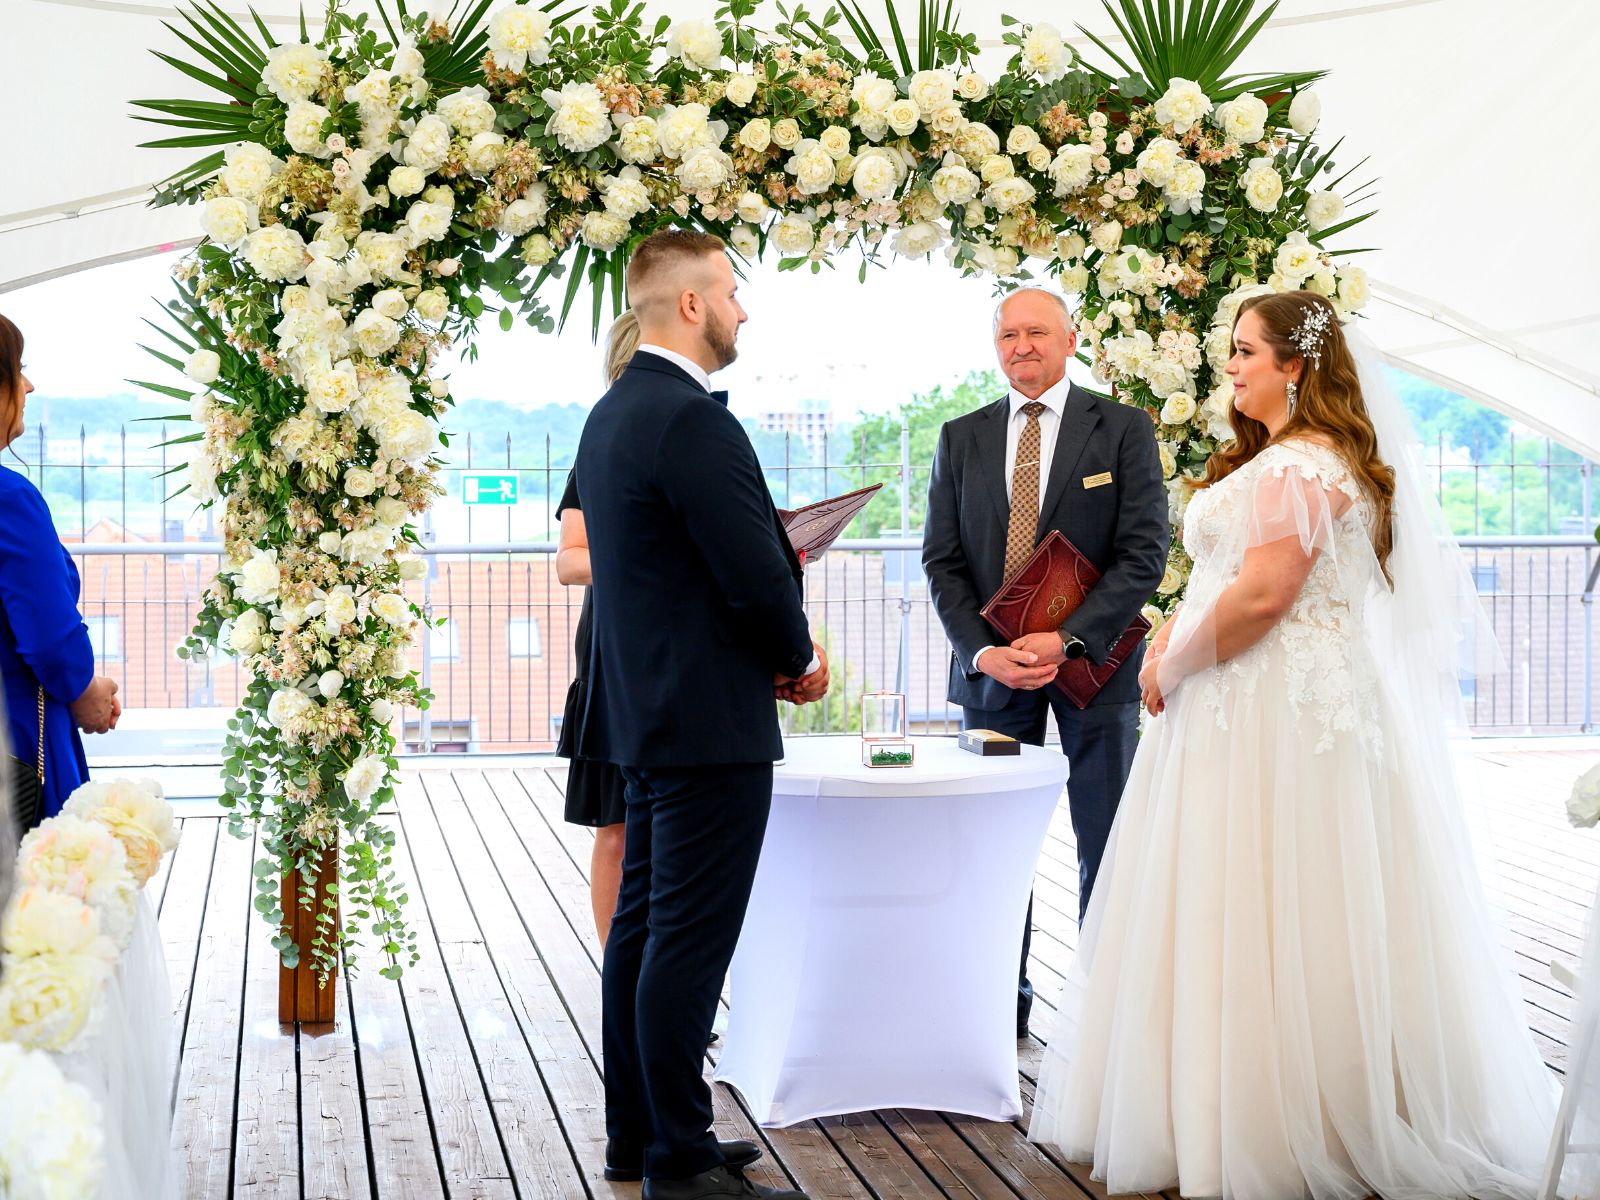 Wedding Ceremony at the Arch With Protea Blushing Bride and Peonies - Blog by Kristina Rimiene on Thursd